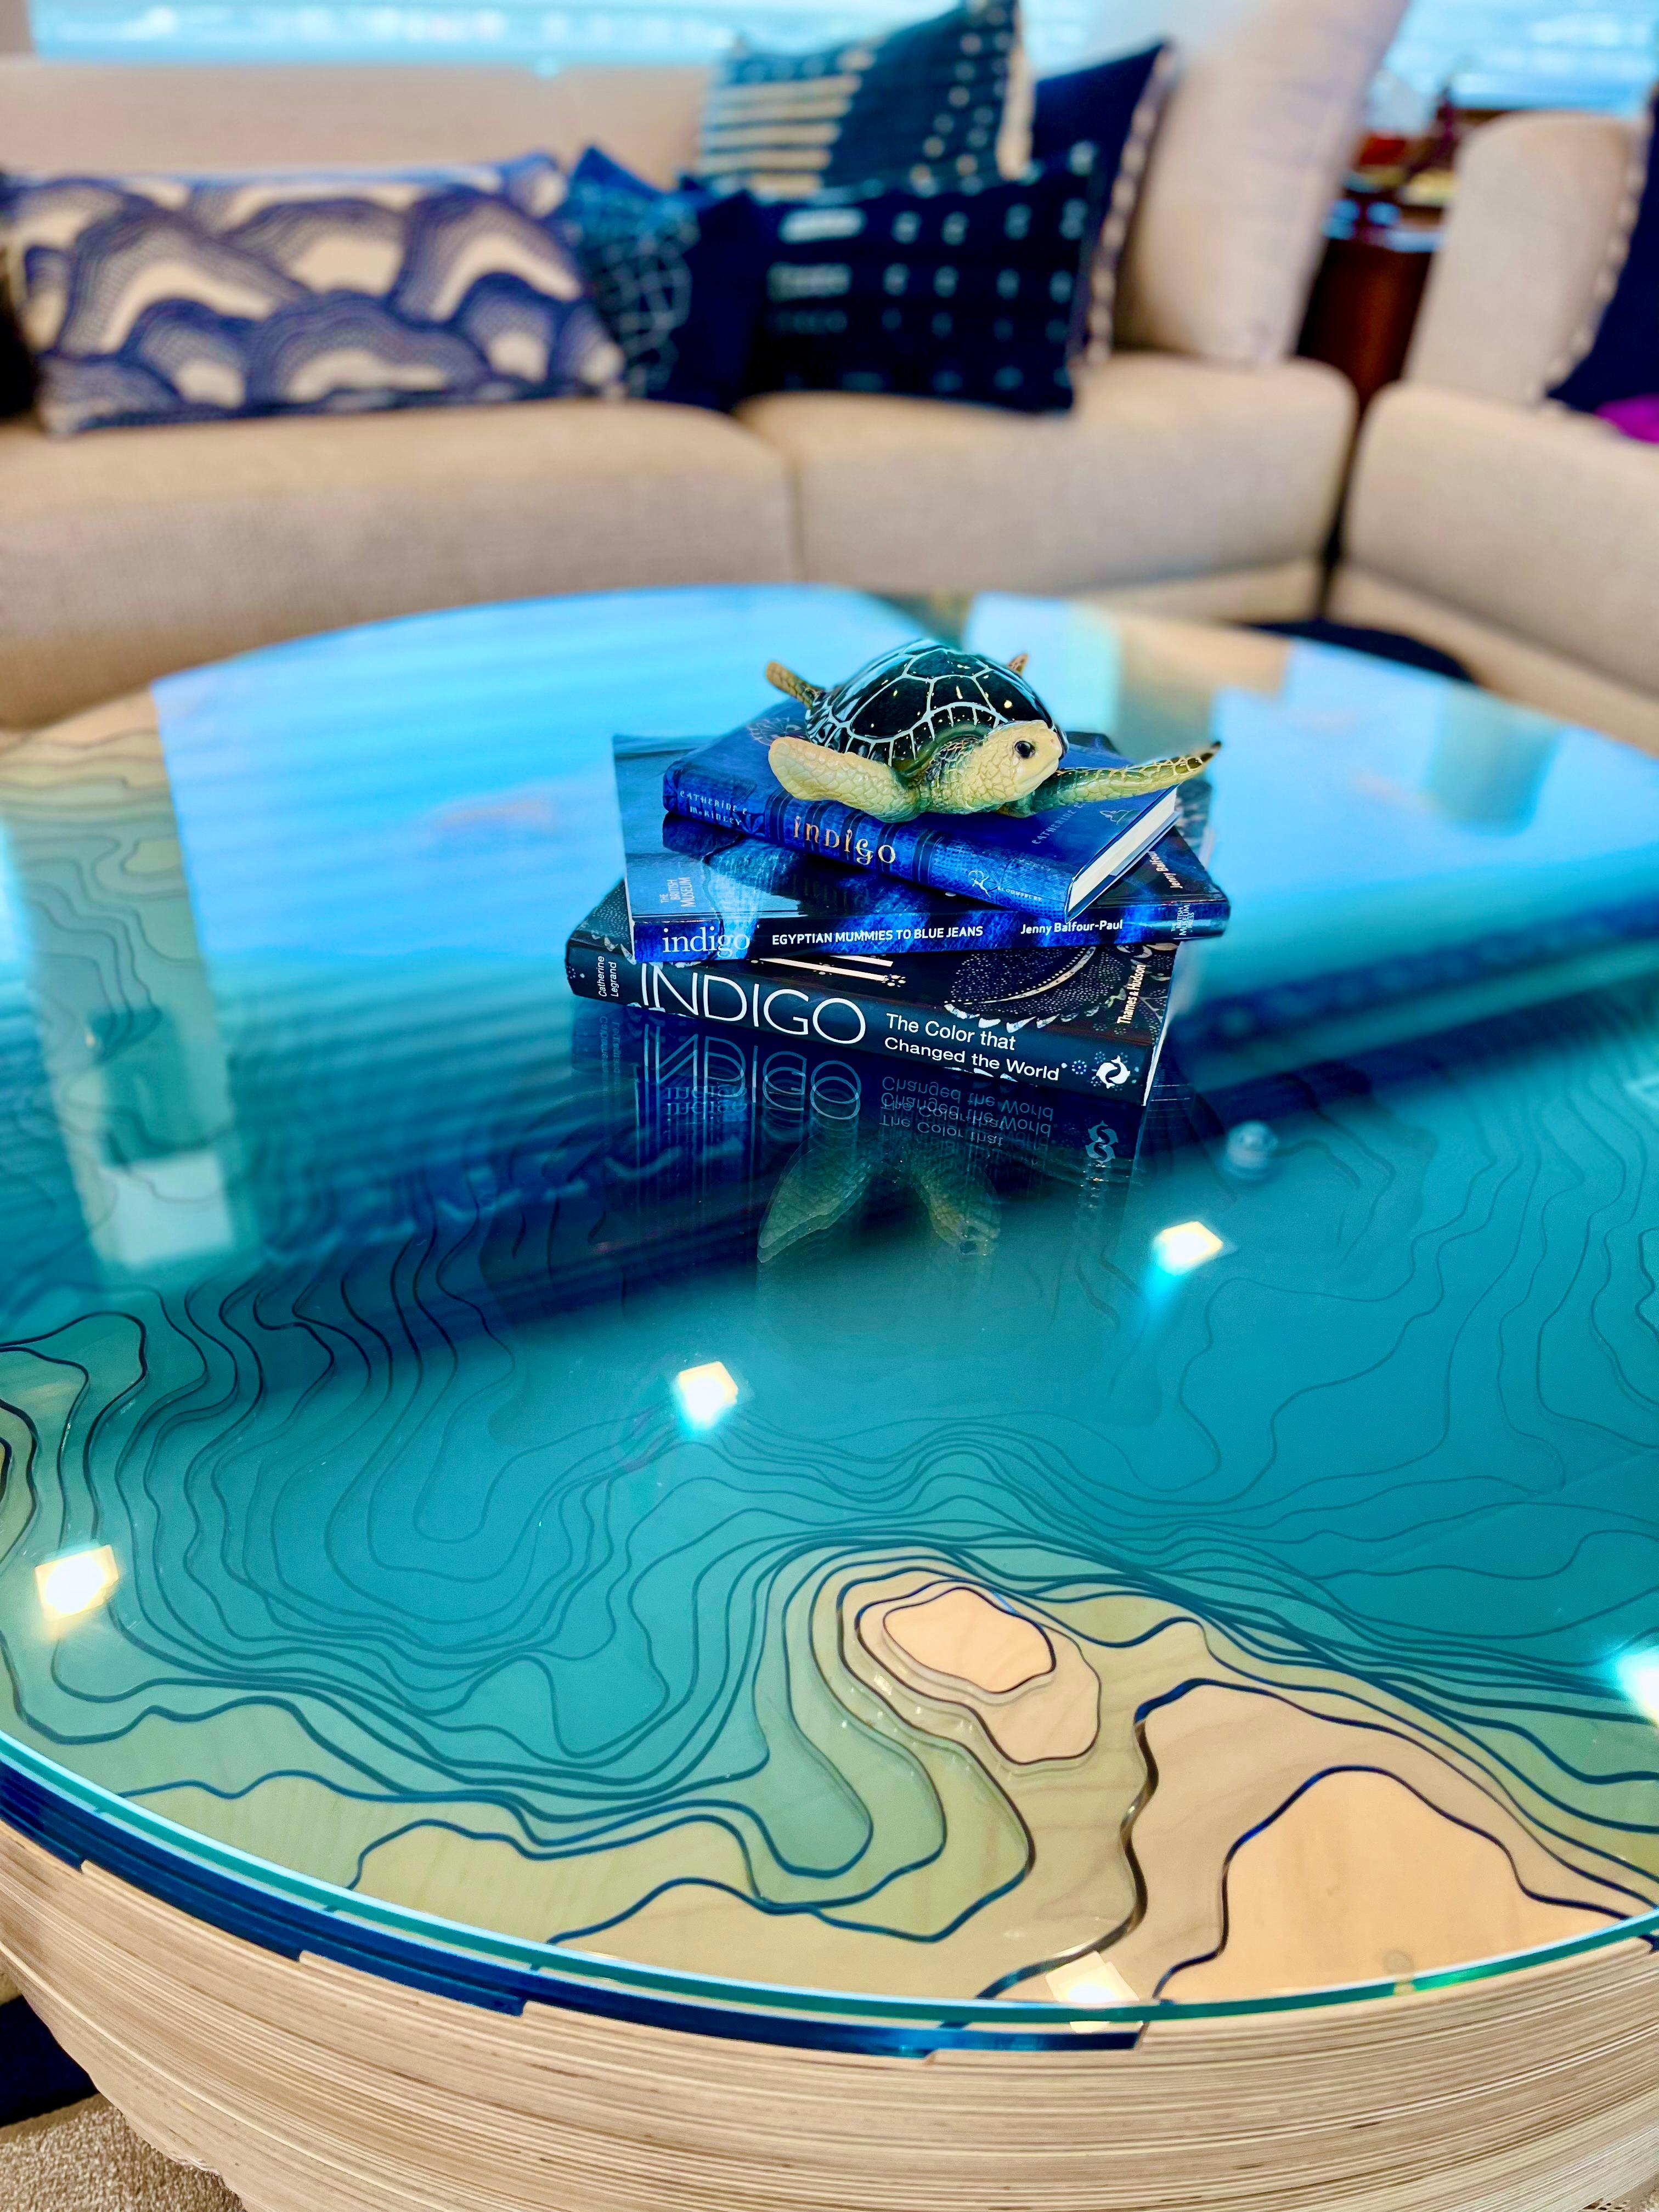 The Abyss Horizon is a unique, modern coffee table design from Duffy London. This listing is for a Yacht edition piece, especially designed to be more light-weight and comes with internal bolt holes for fixing to the ground.

A dramatic, circular